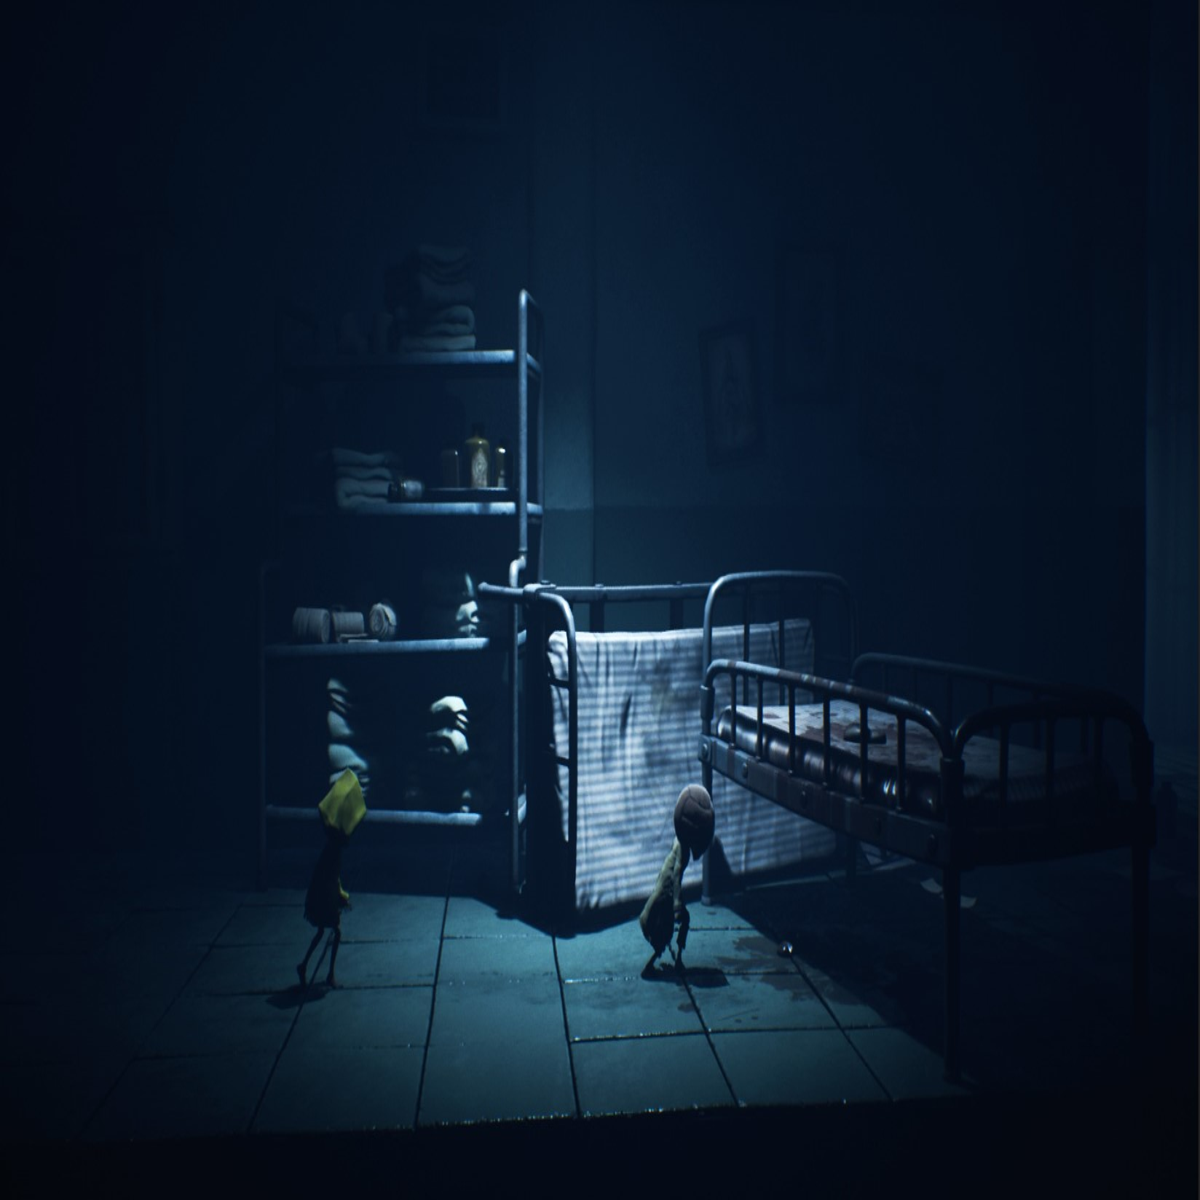 Little Nightmares II - Sony PlayStation 4 for sale online